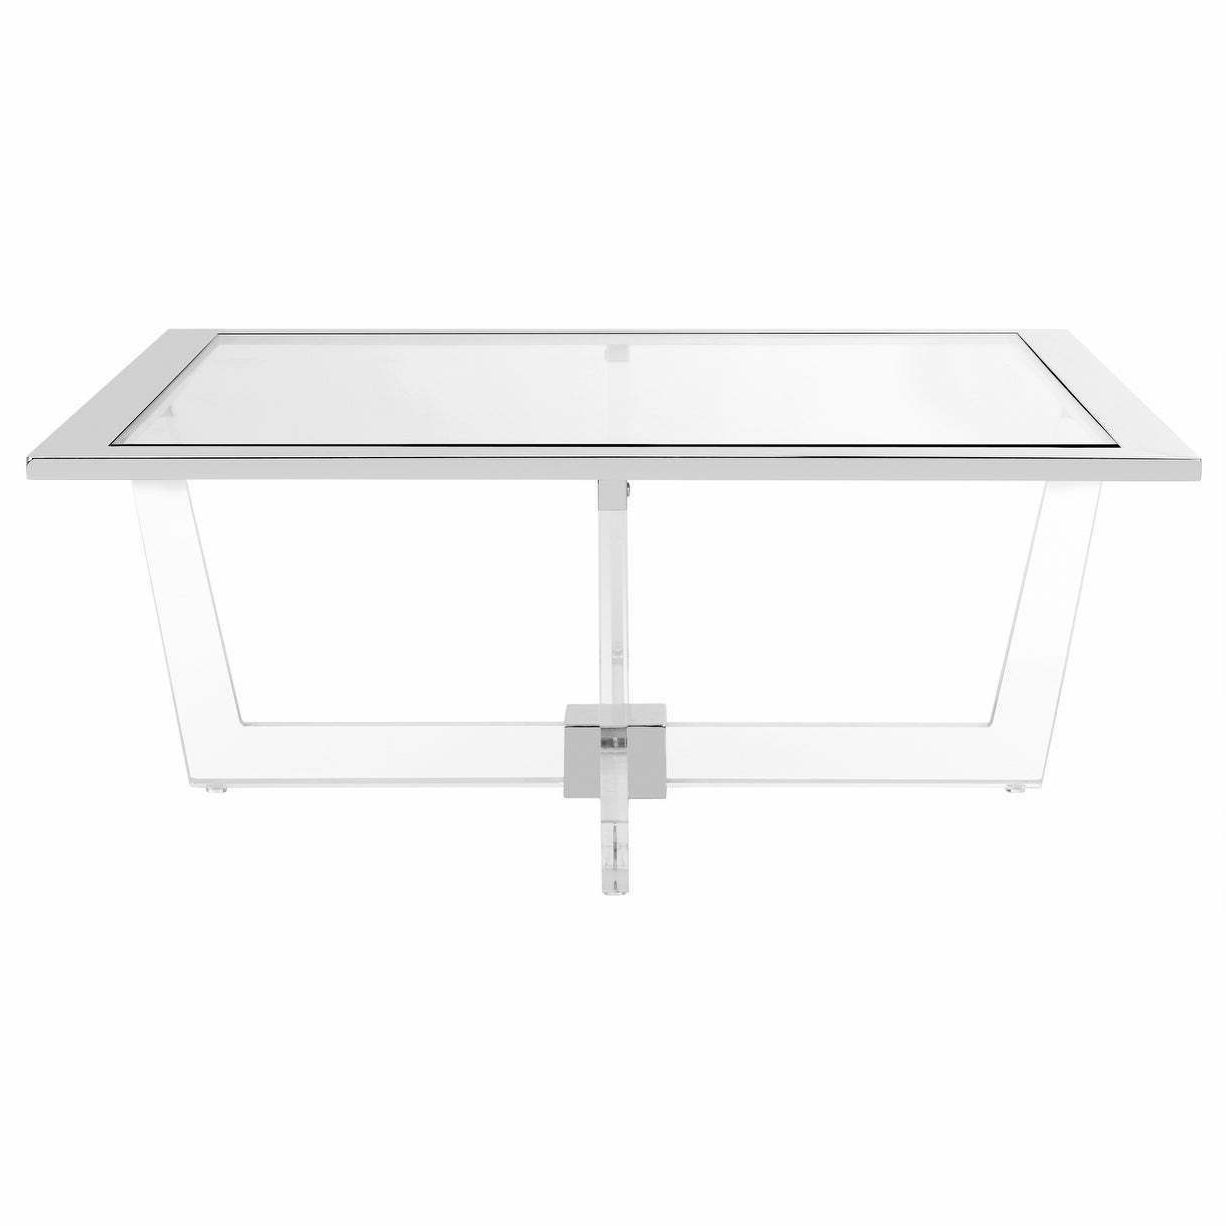 Safavieh Couture Hermina Glass Coffee Table  Clear – 39 In W Clear 39 In W  X 39 Intended For Popular Safavieh Couture Gianna Glass Coffee Tables (View 14 of 20)